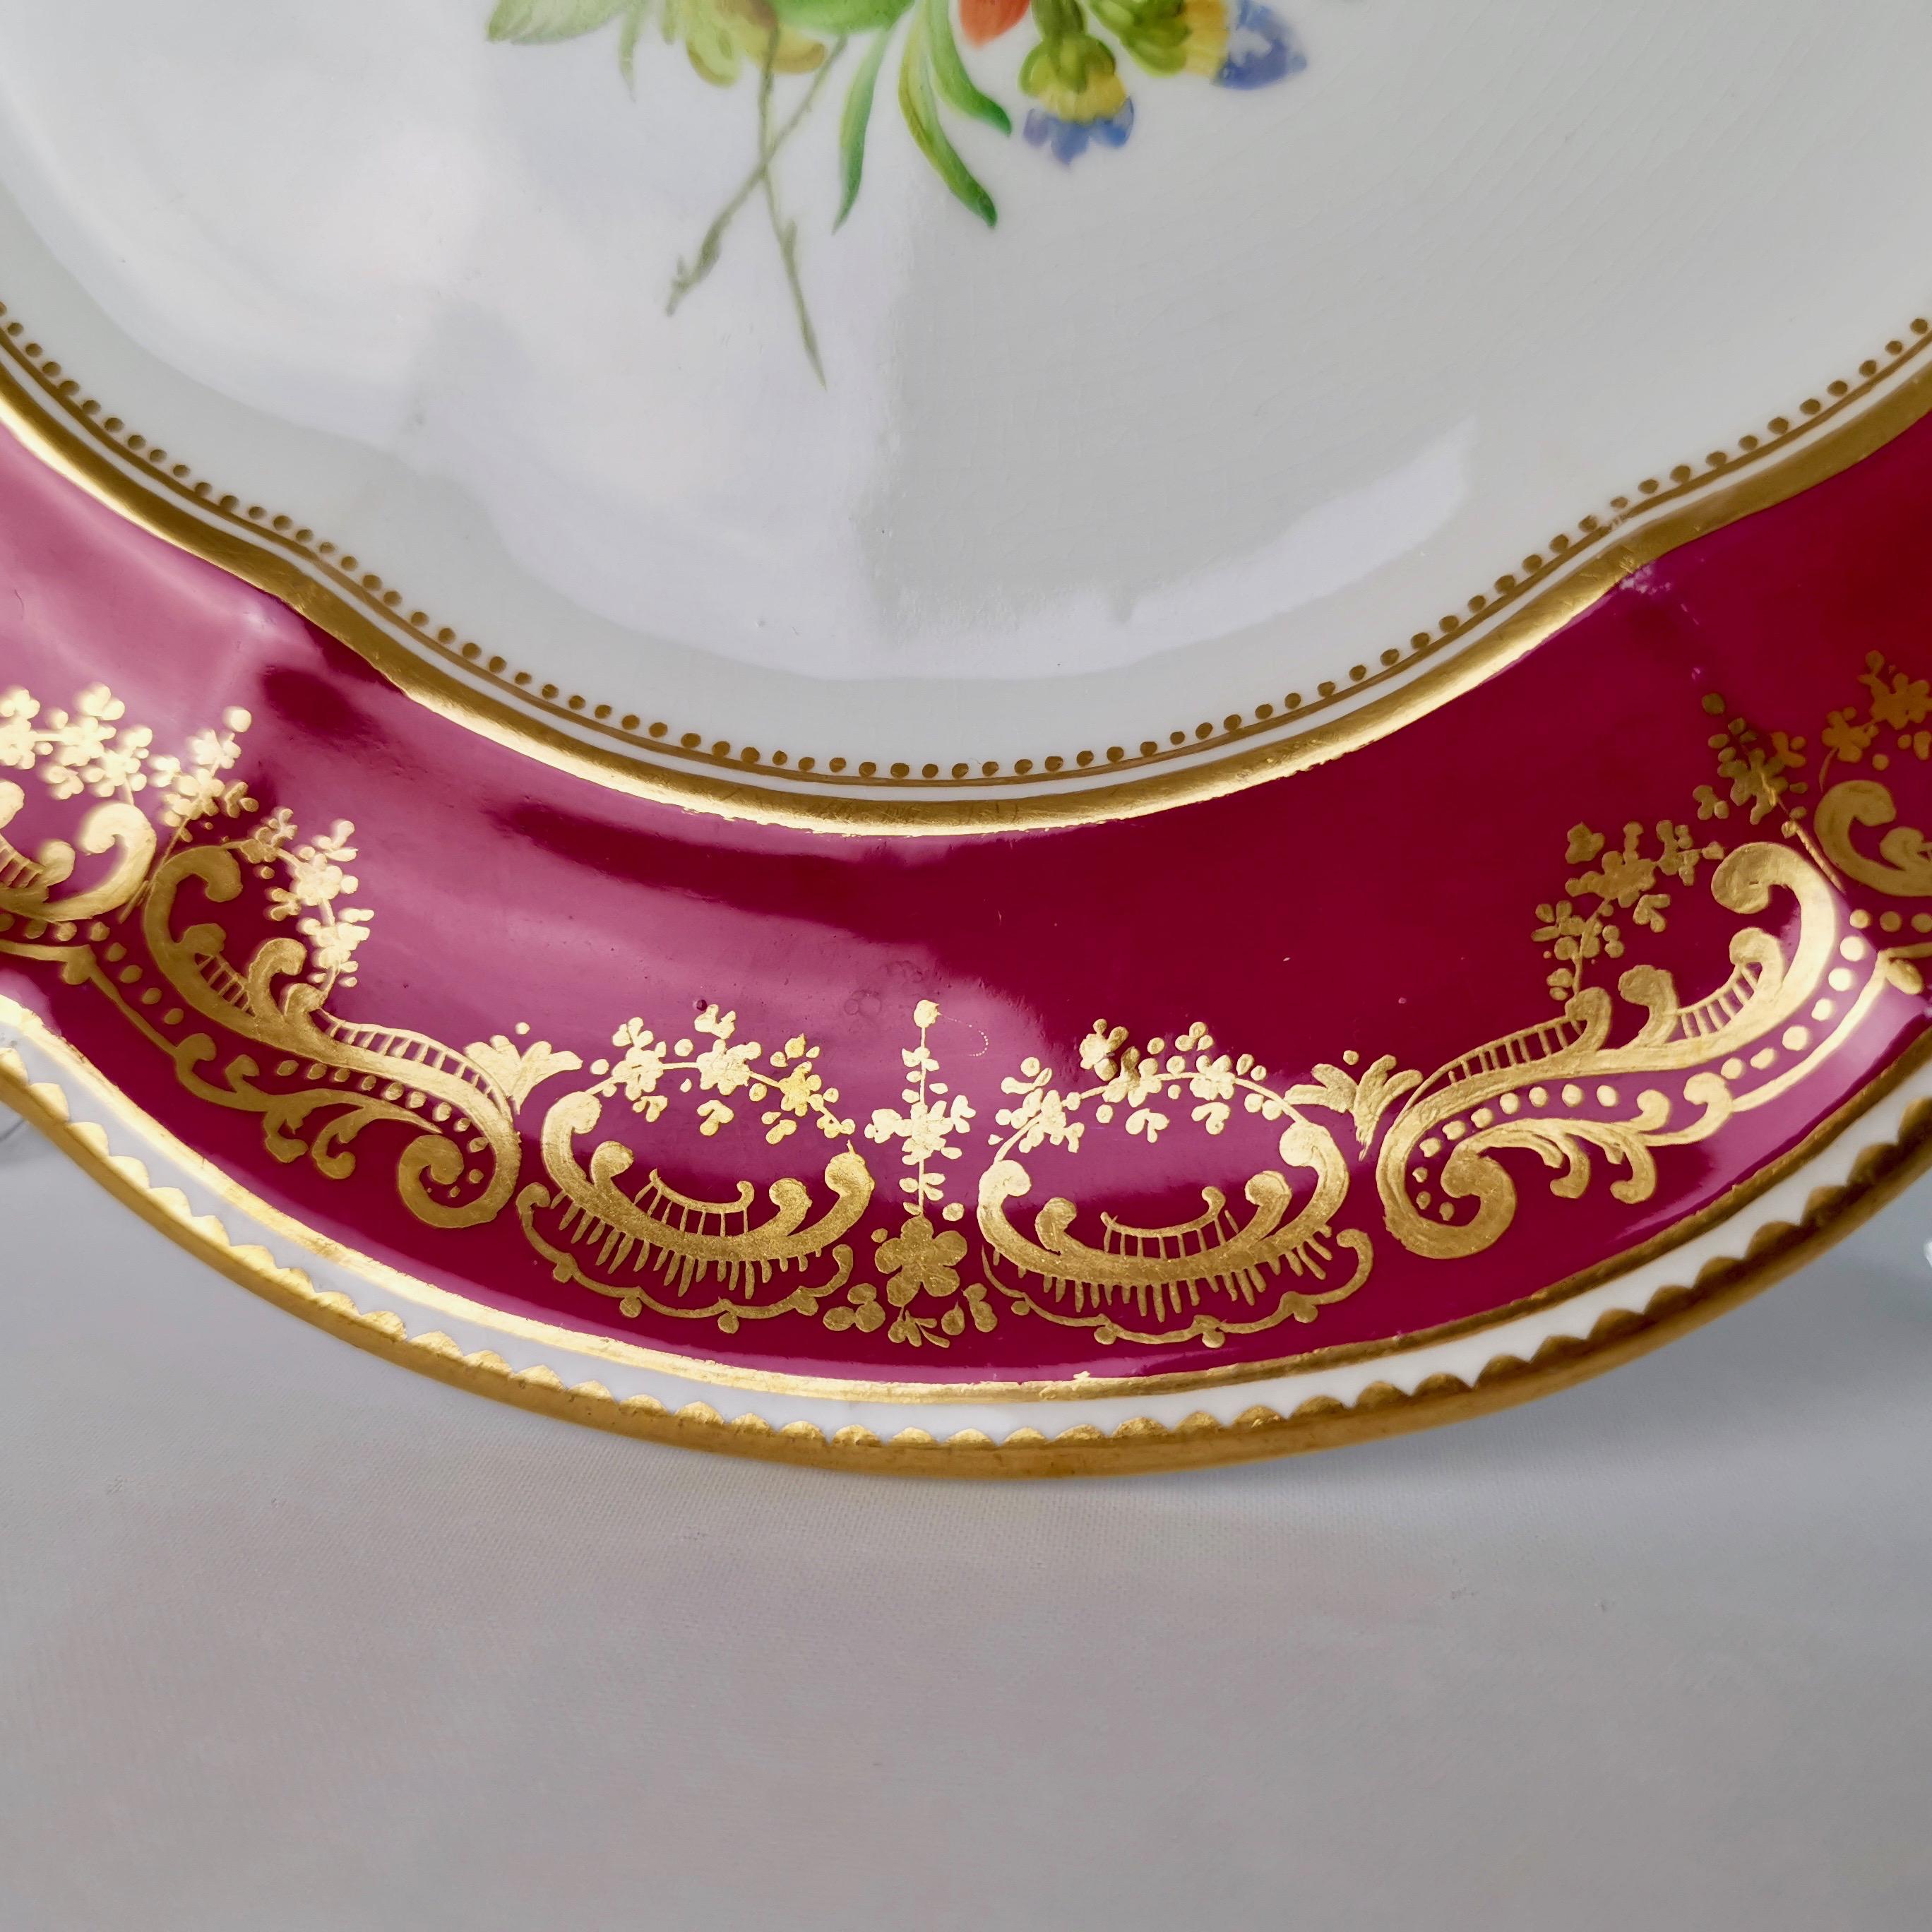 Victorian Coalport Porcelain Plate, Maroon with Flowers by Thomas Dixon, circa 1860